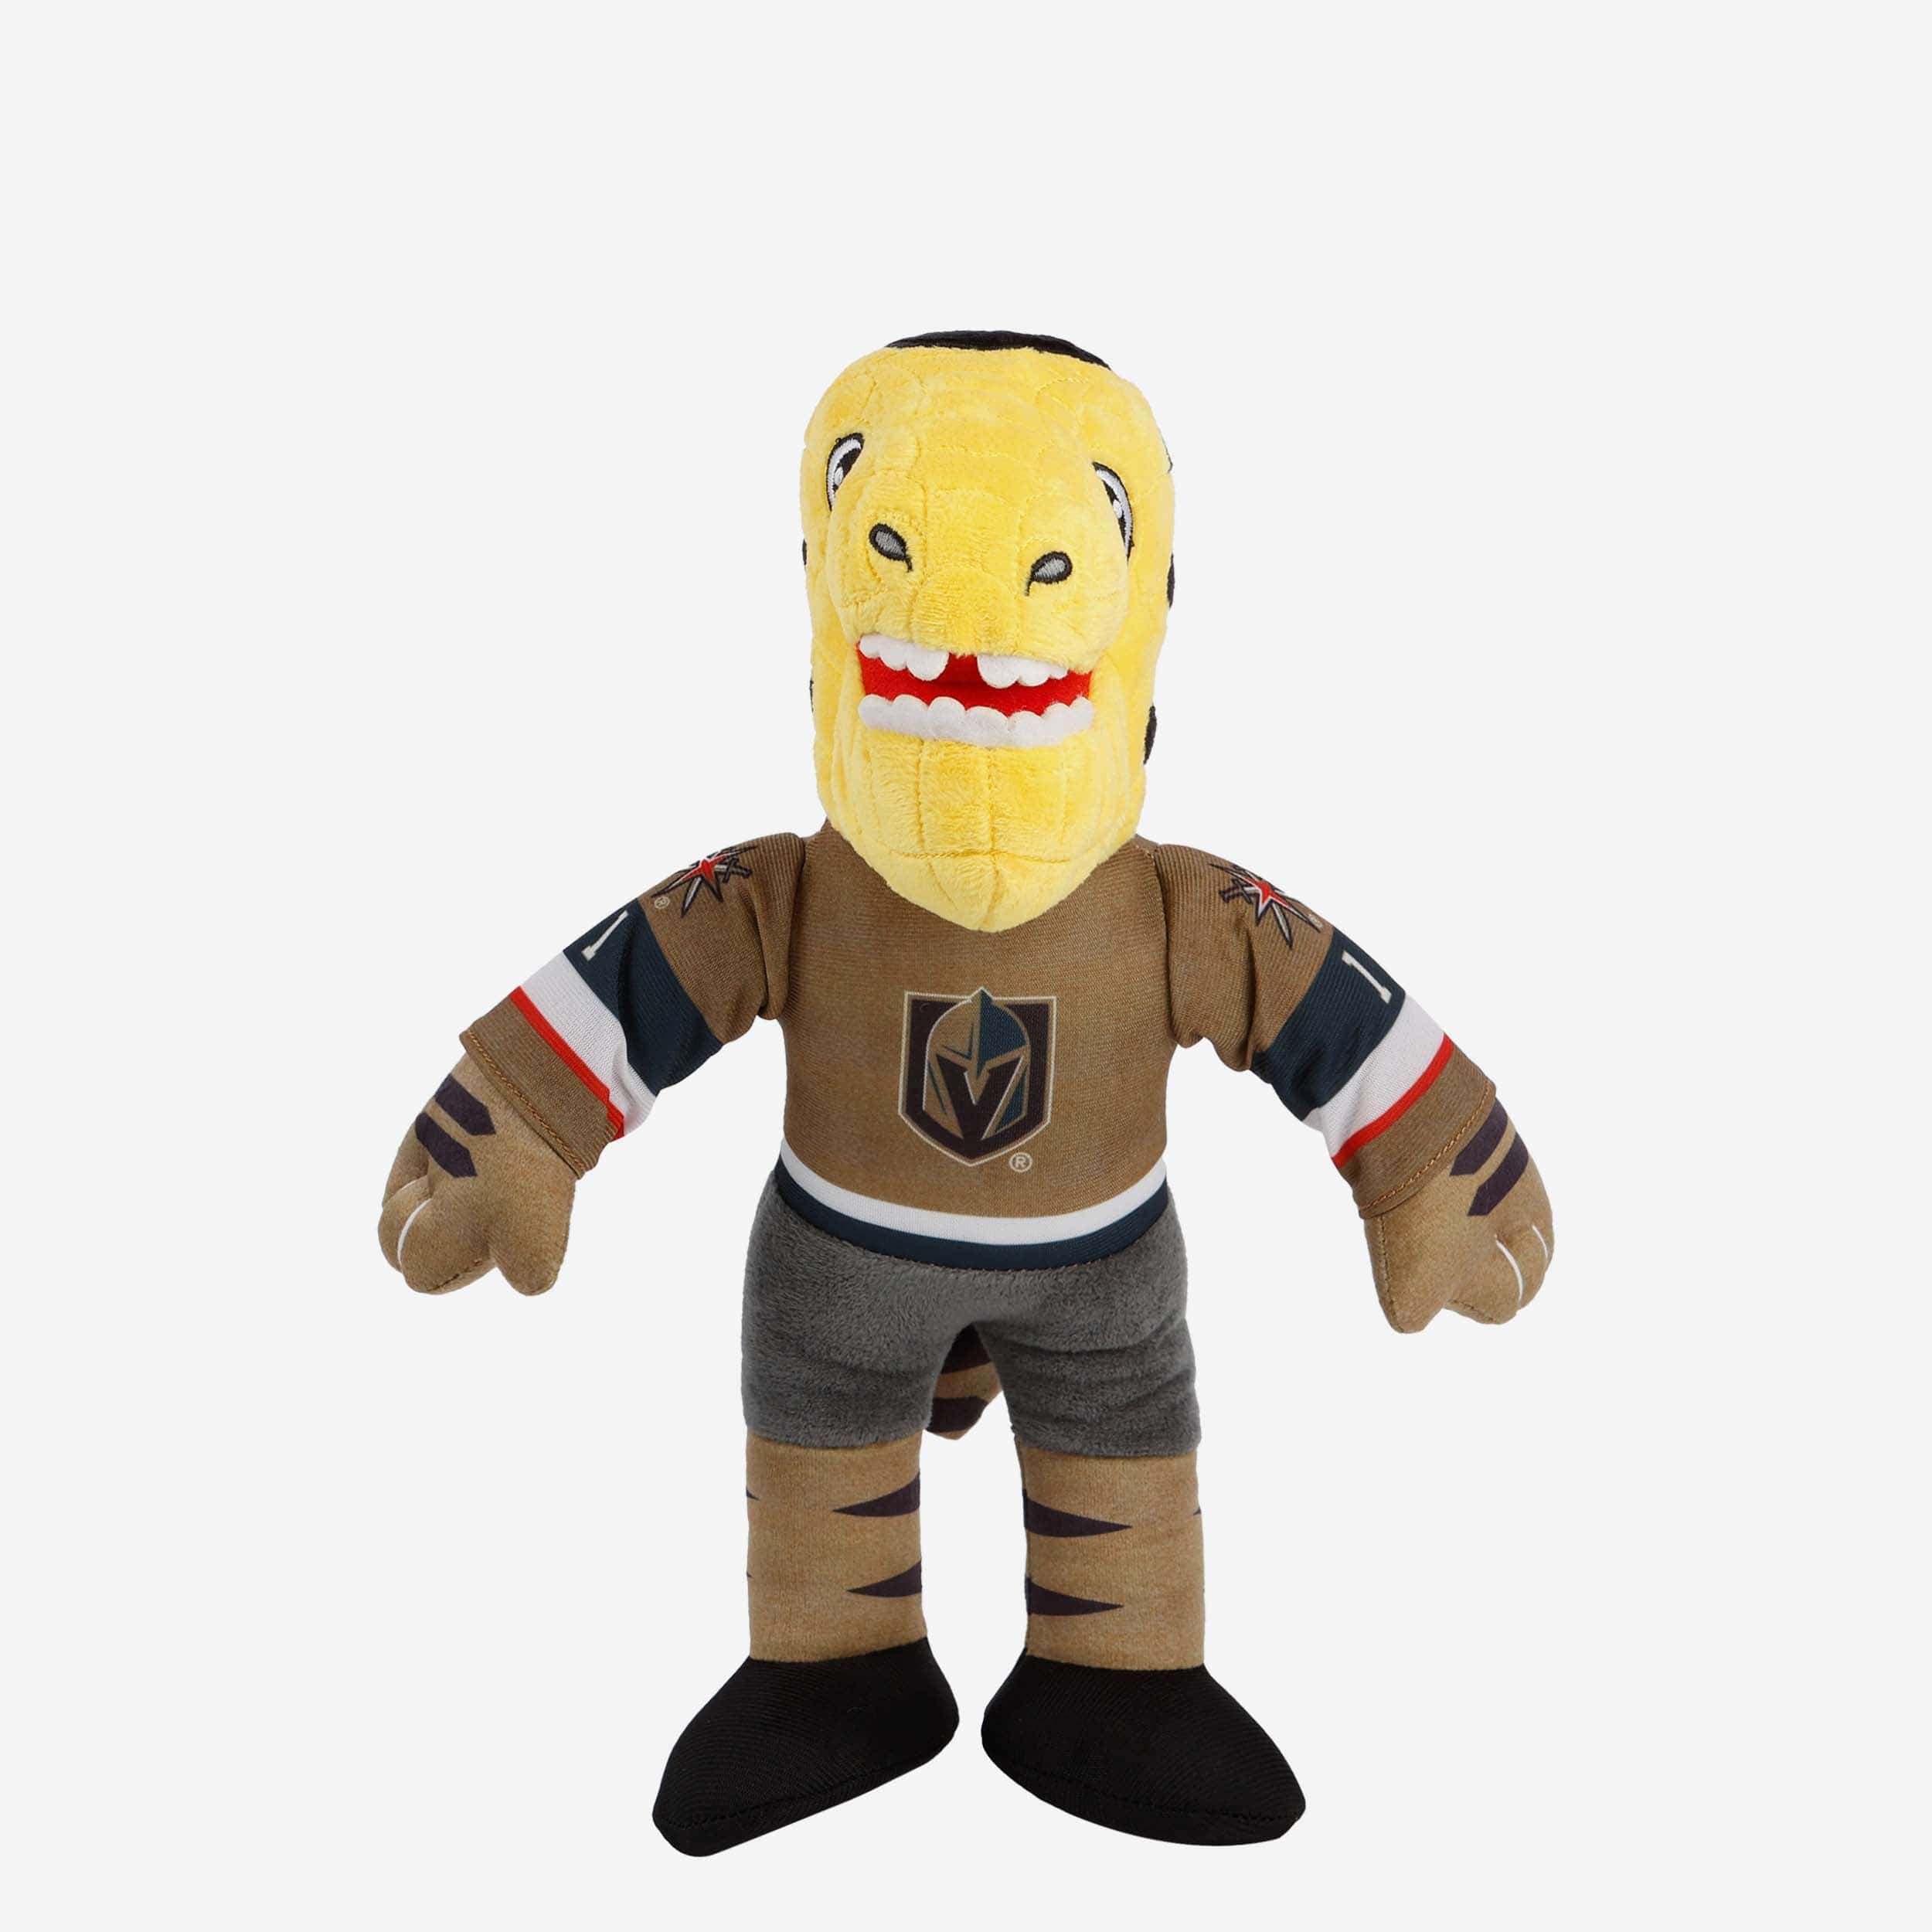  Bleacher Creatures Anaheim Ducks Wild Wing 10 NHL Mascot Plush  Figure - A Mascot for Play or Display : Sports & Outdoors